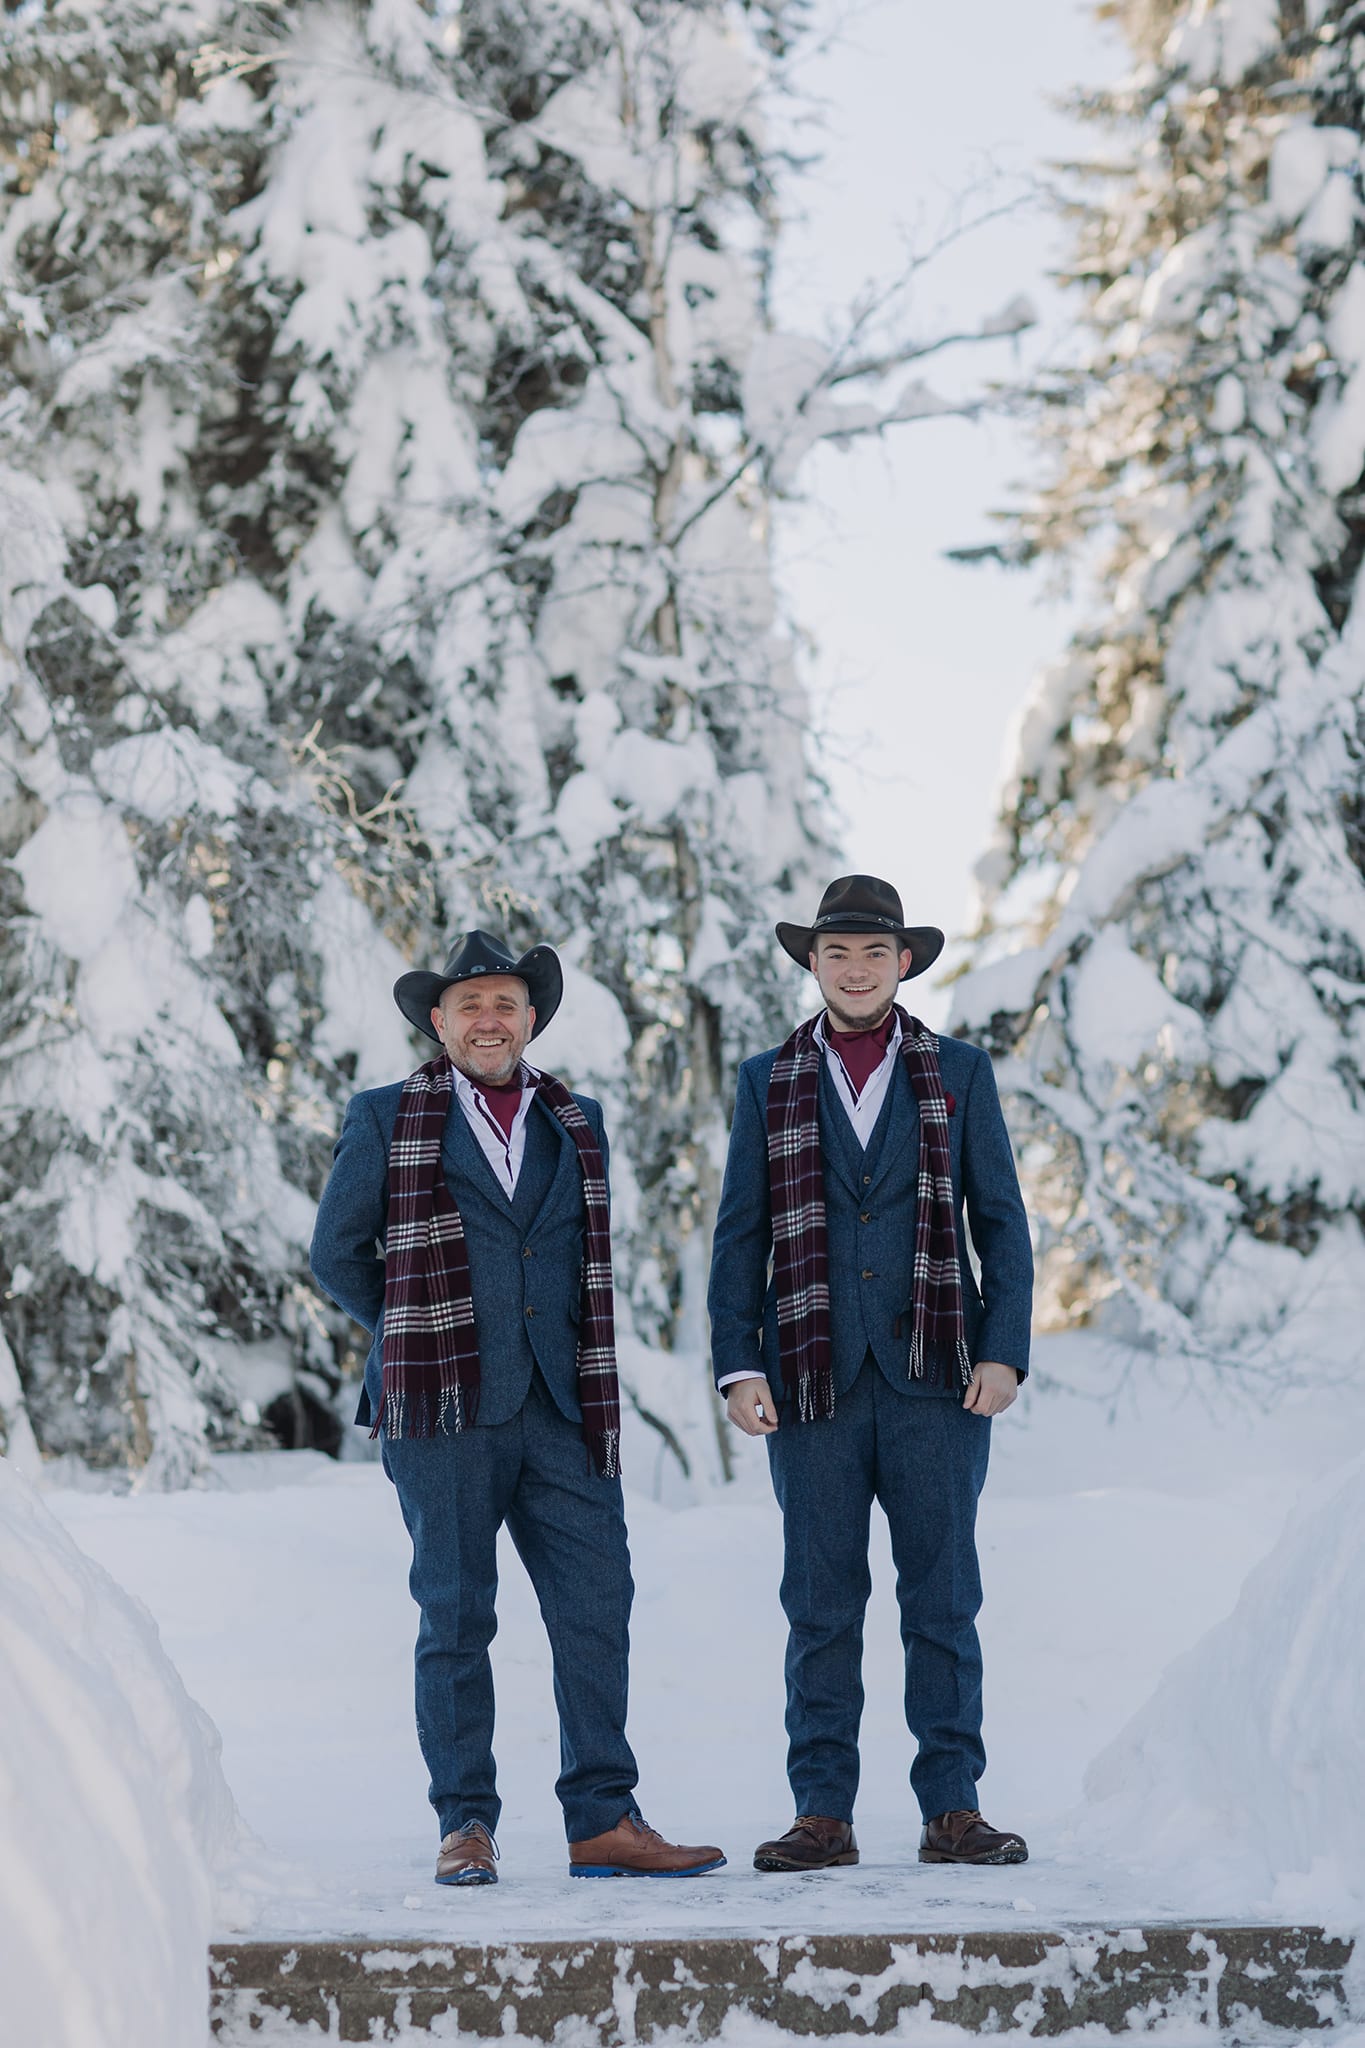 New Years Eve Elopement at Emerald lake Lodge